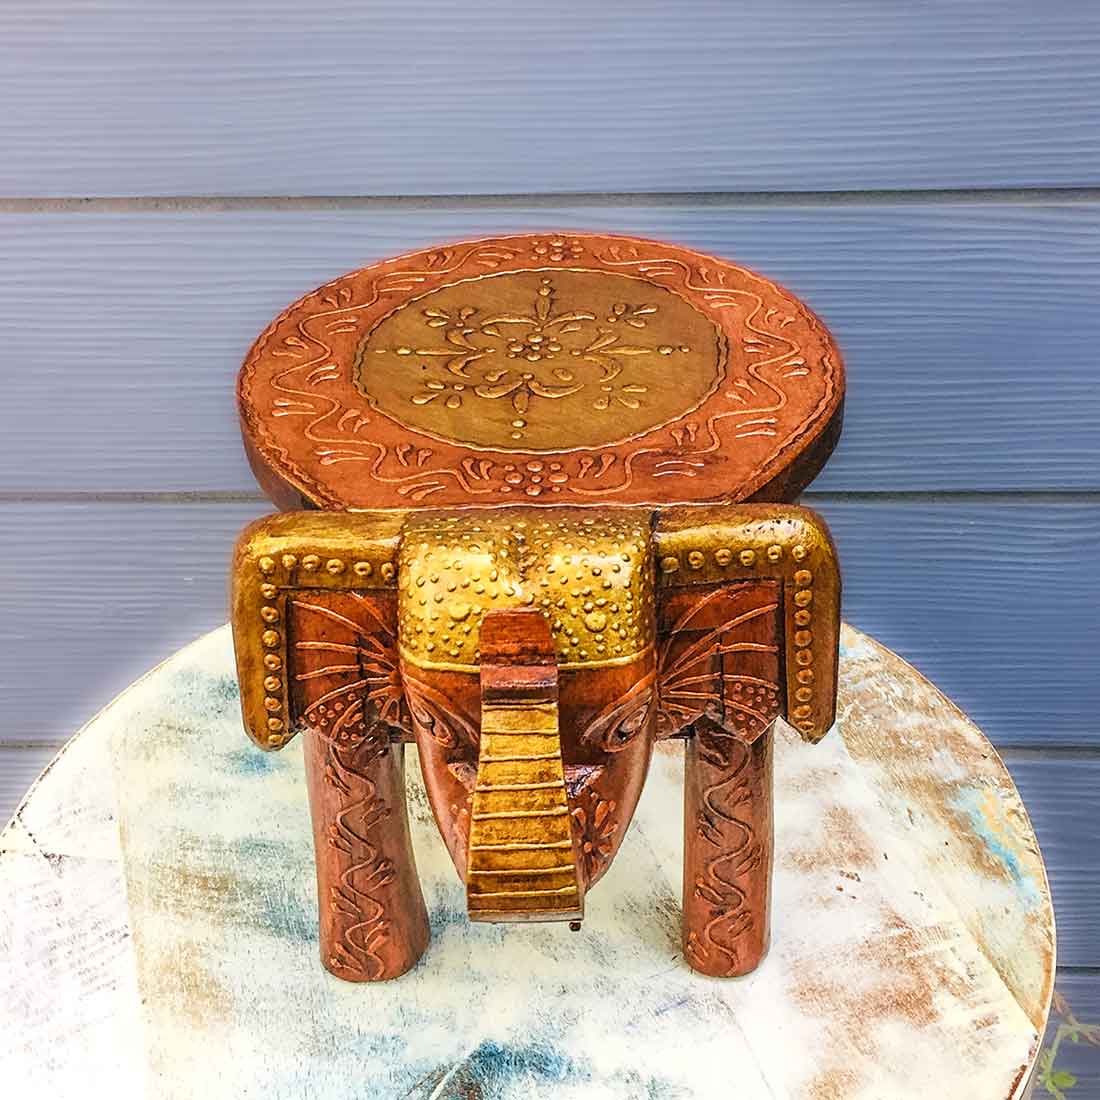 Elephant Stool 8 Inch | Copper Showpiece for Table Decor and Gifts - ApkaMart